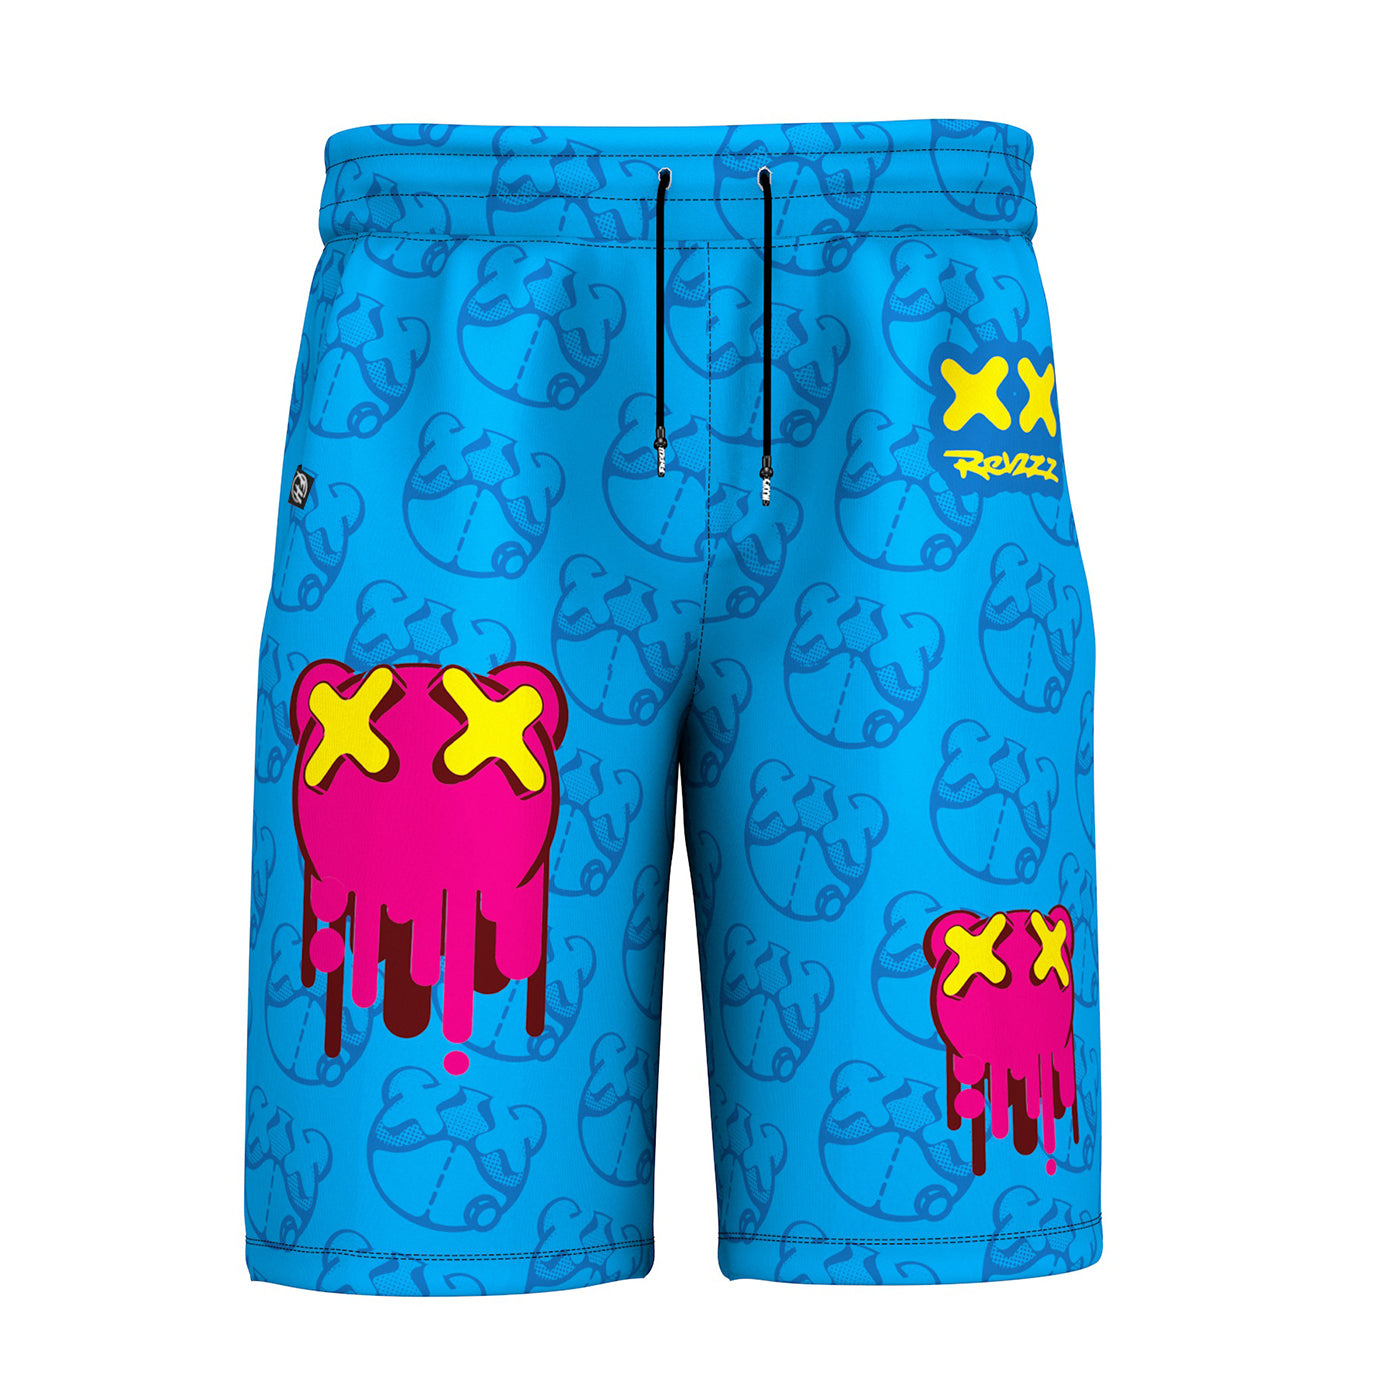 Buy Dripping Shorts Online In India -  India